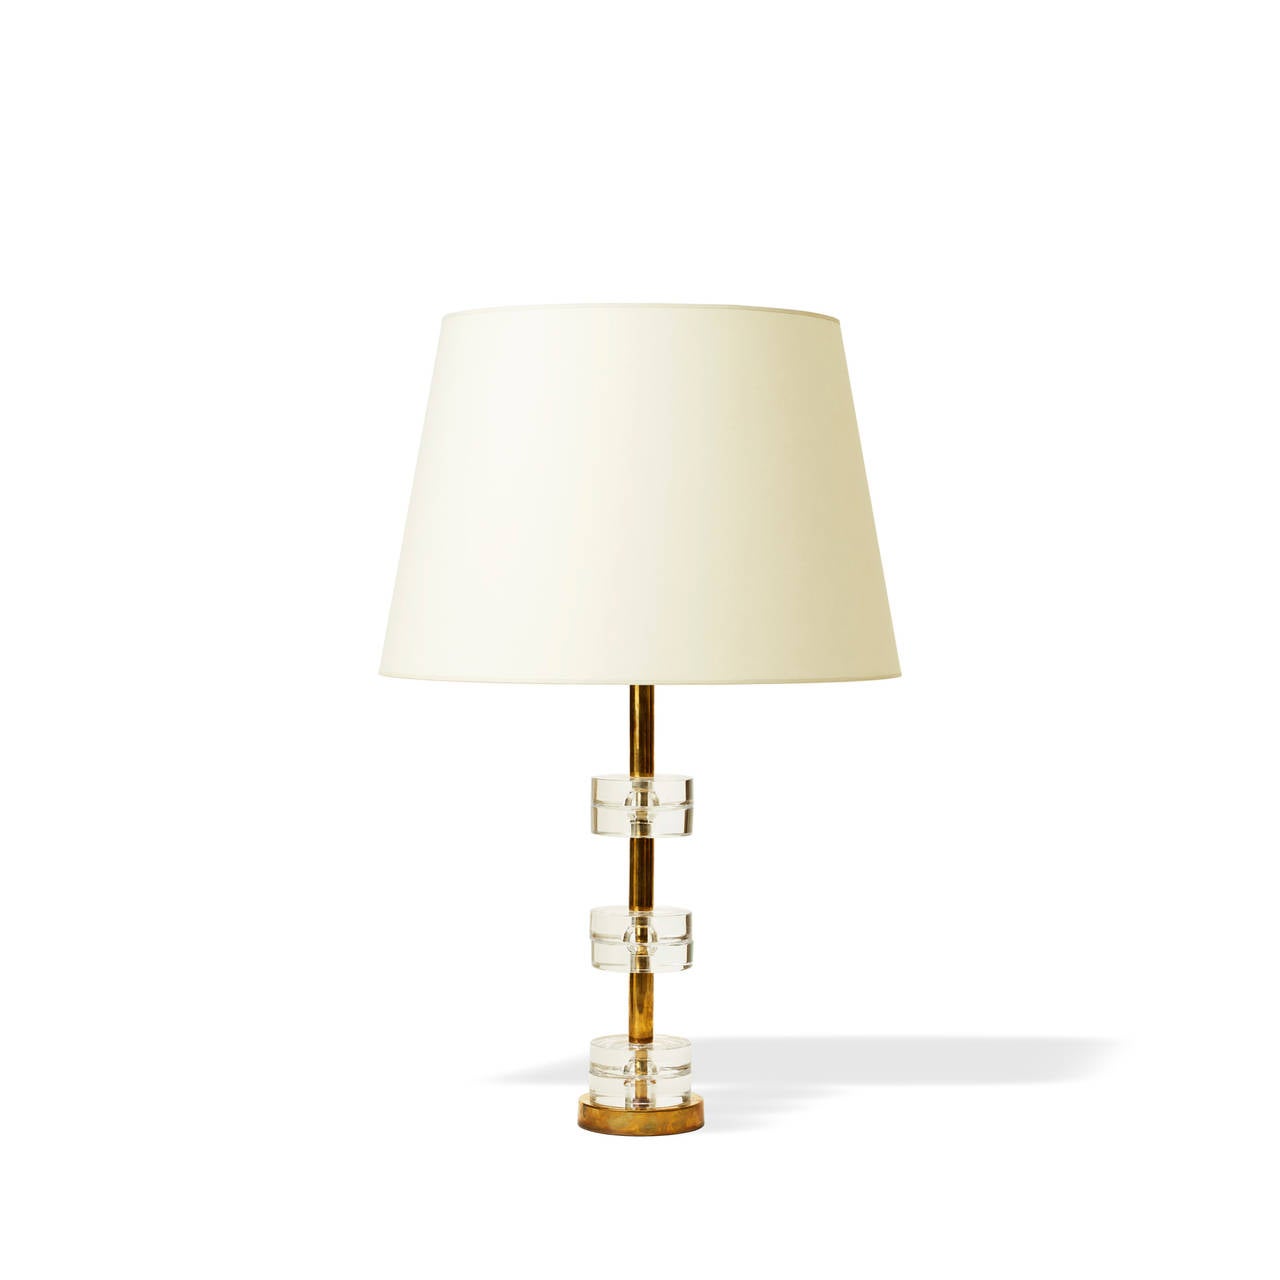 Glamorous deco-inspired lamp with brass base from which three pairs of cast glass disks are suspended at intervals, designed by Carl Fagerlund for Orrefors, Sweden, mid-20th century.